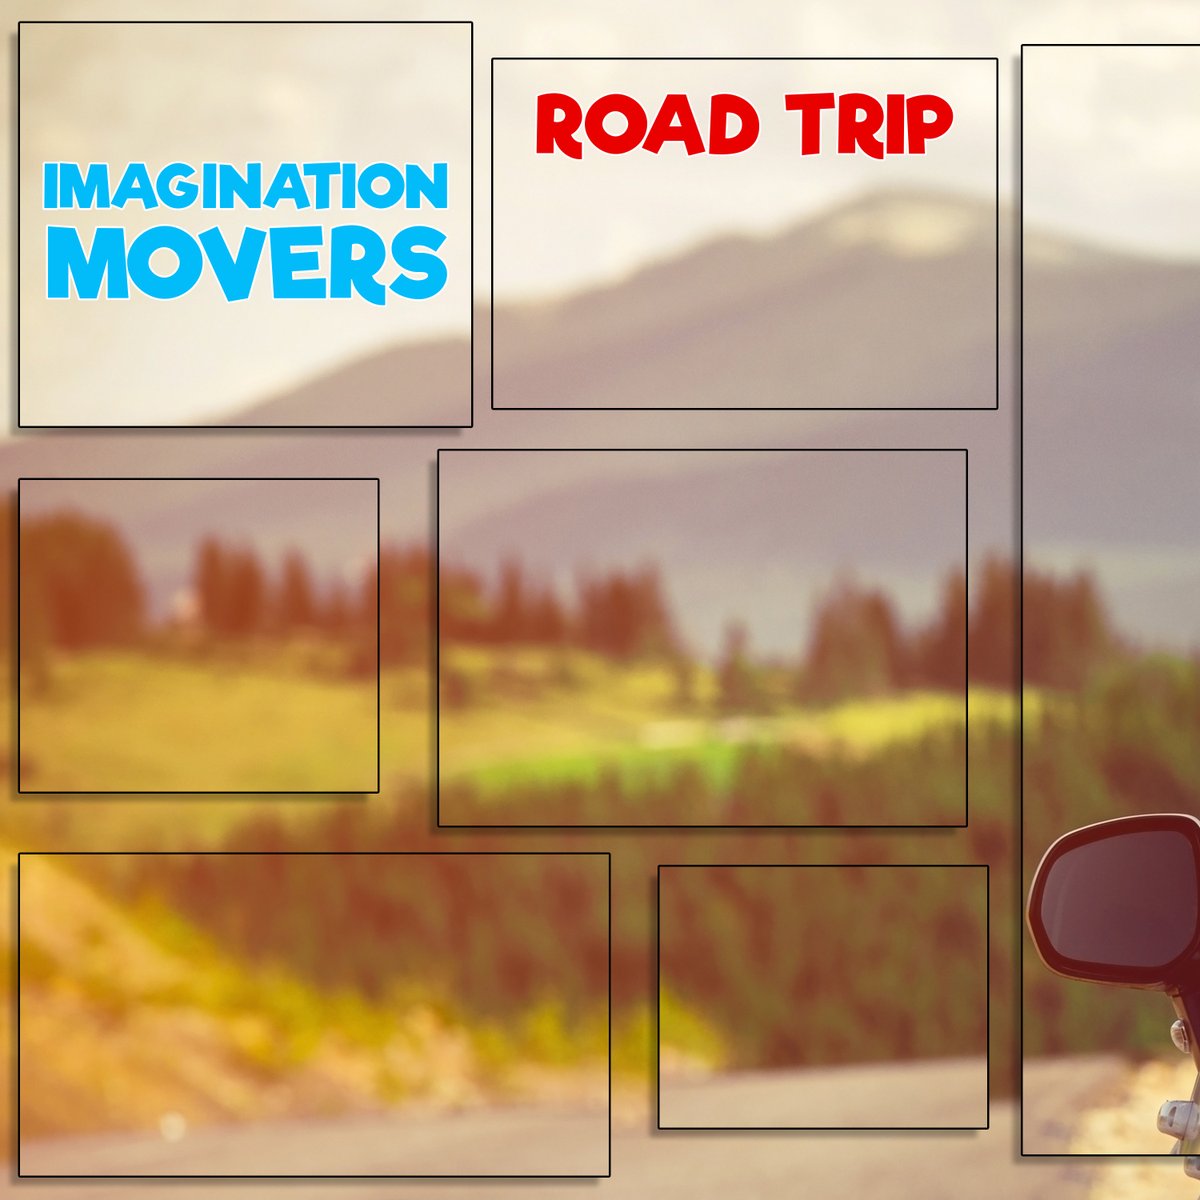 New Mover song drops today: linktr.ee/imovers #RoadTrip #Choirs #FamilyRoadTrip